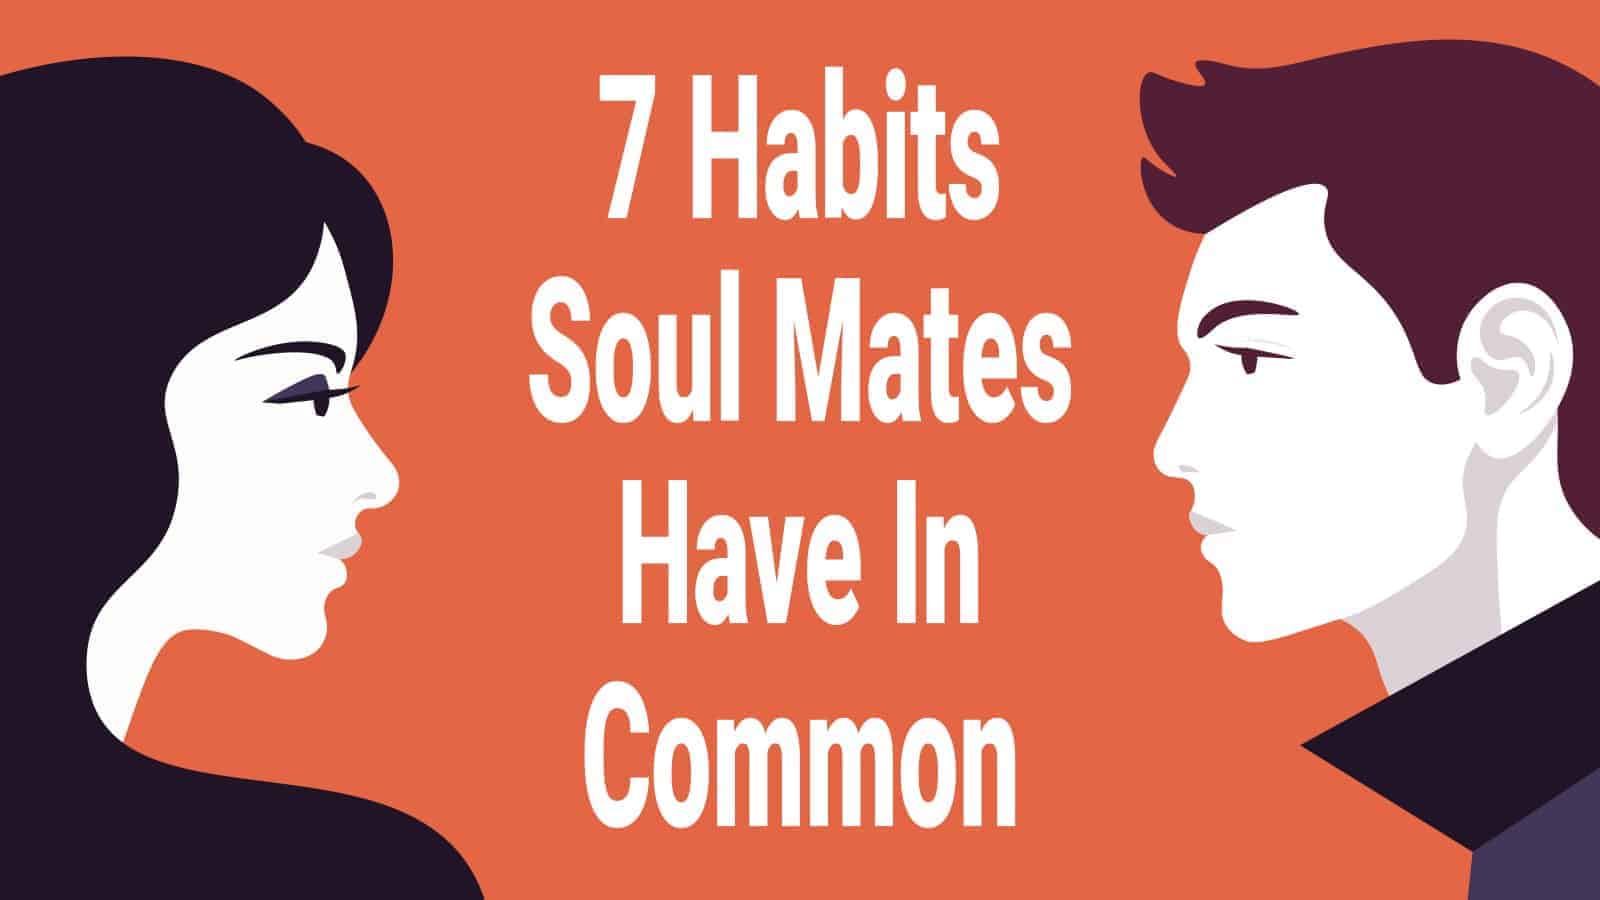 7 Habits Soul Mates Have In Common